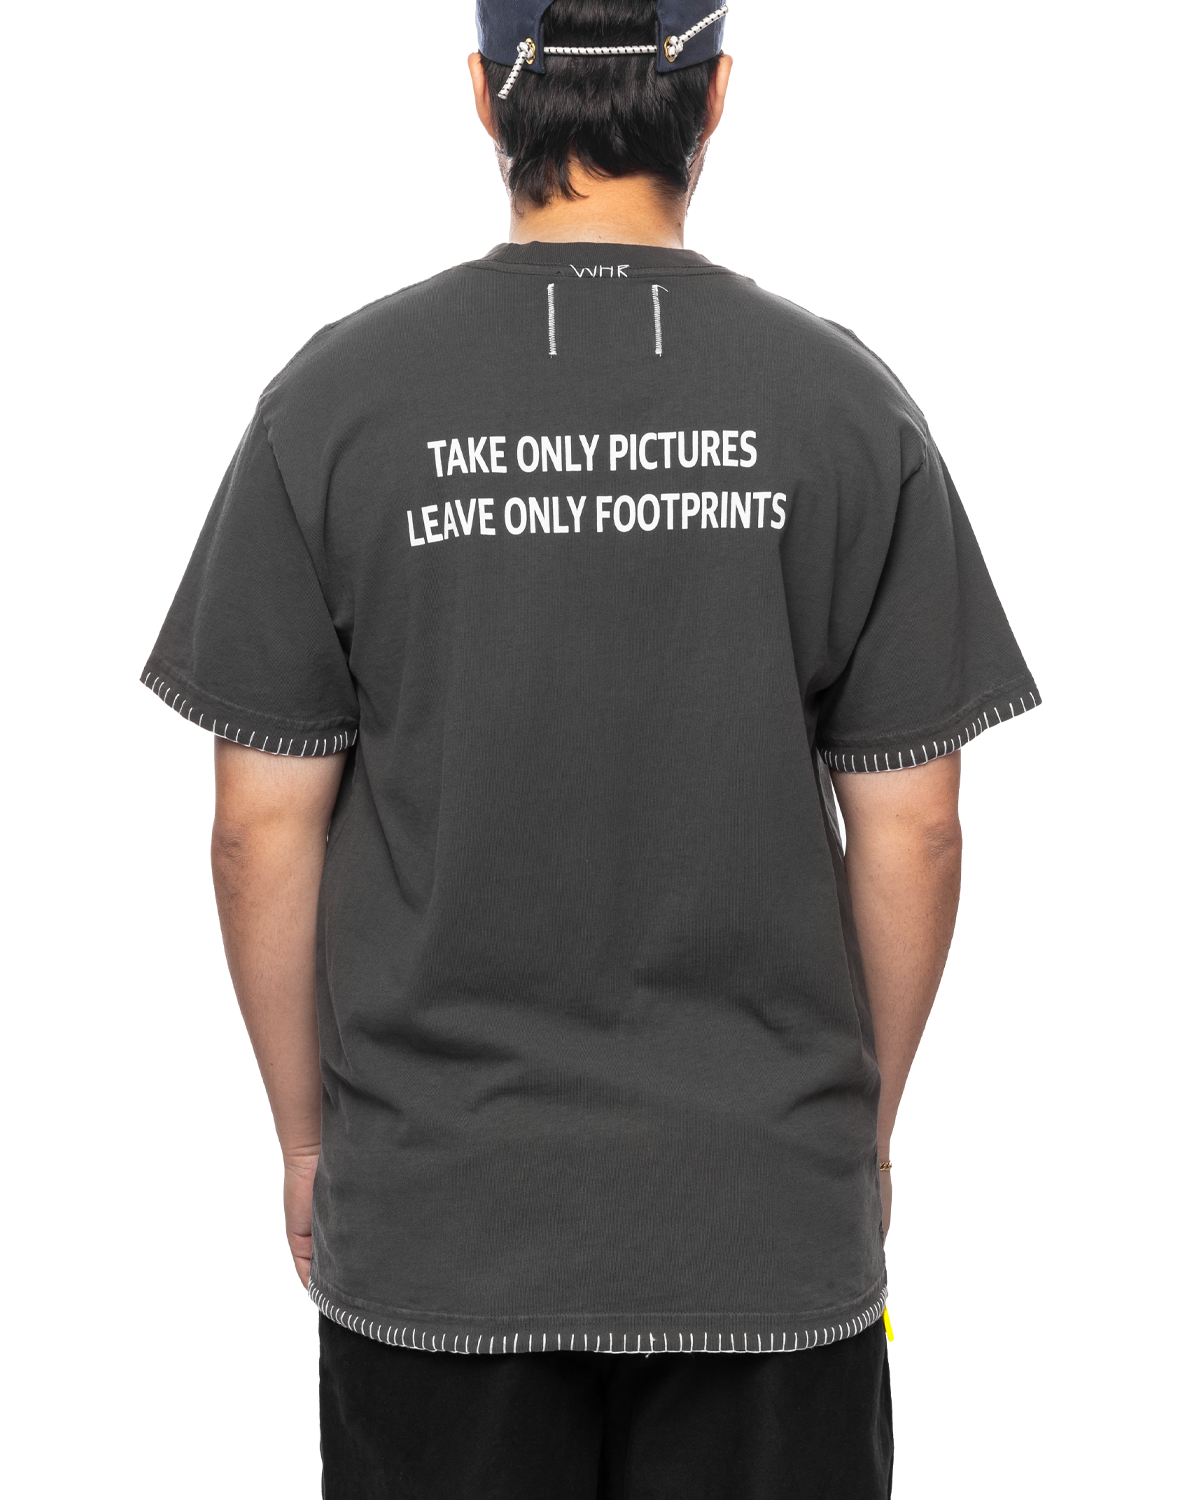 Take Only Pictures Tee Black